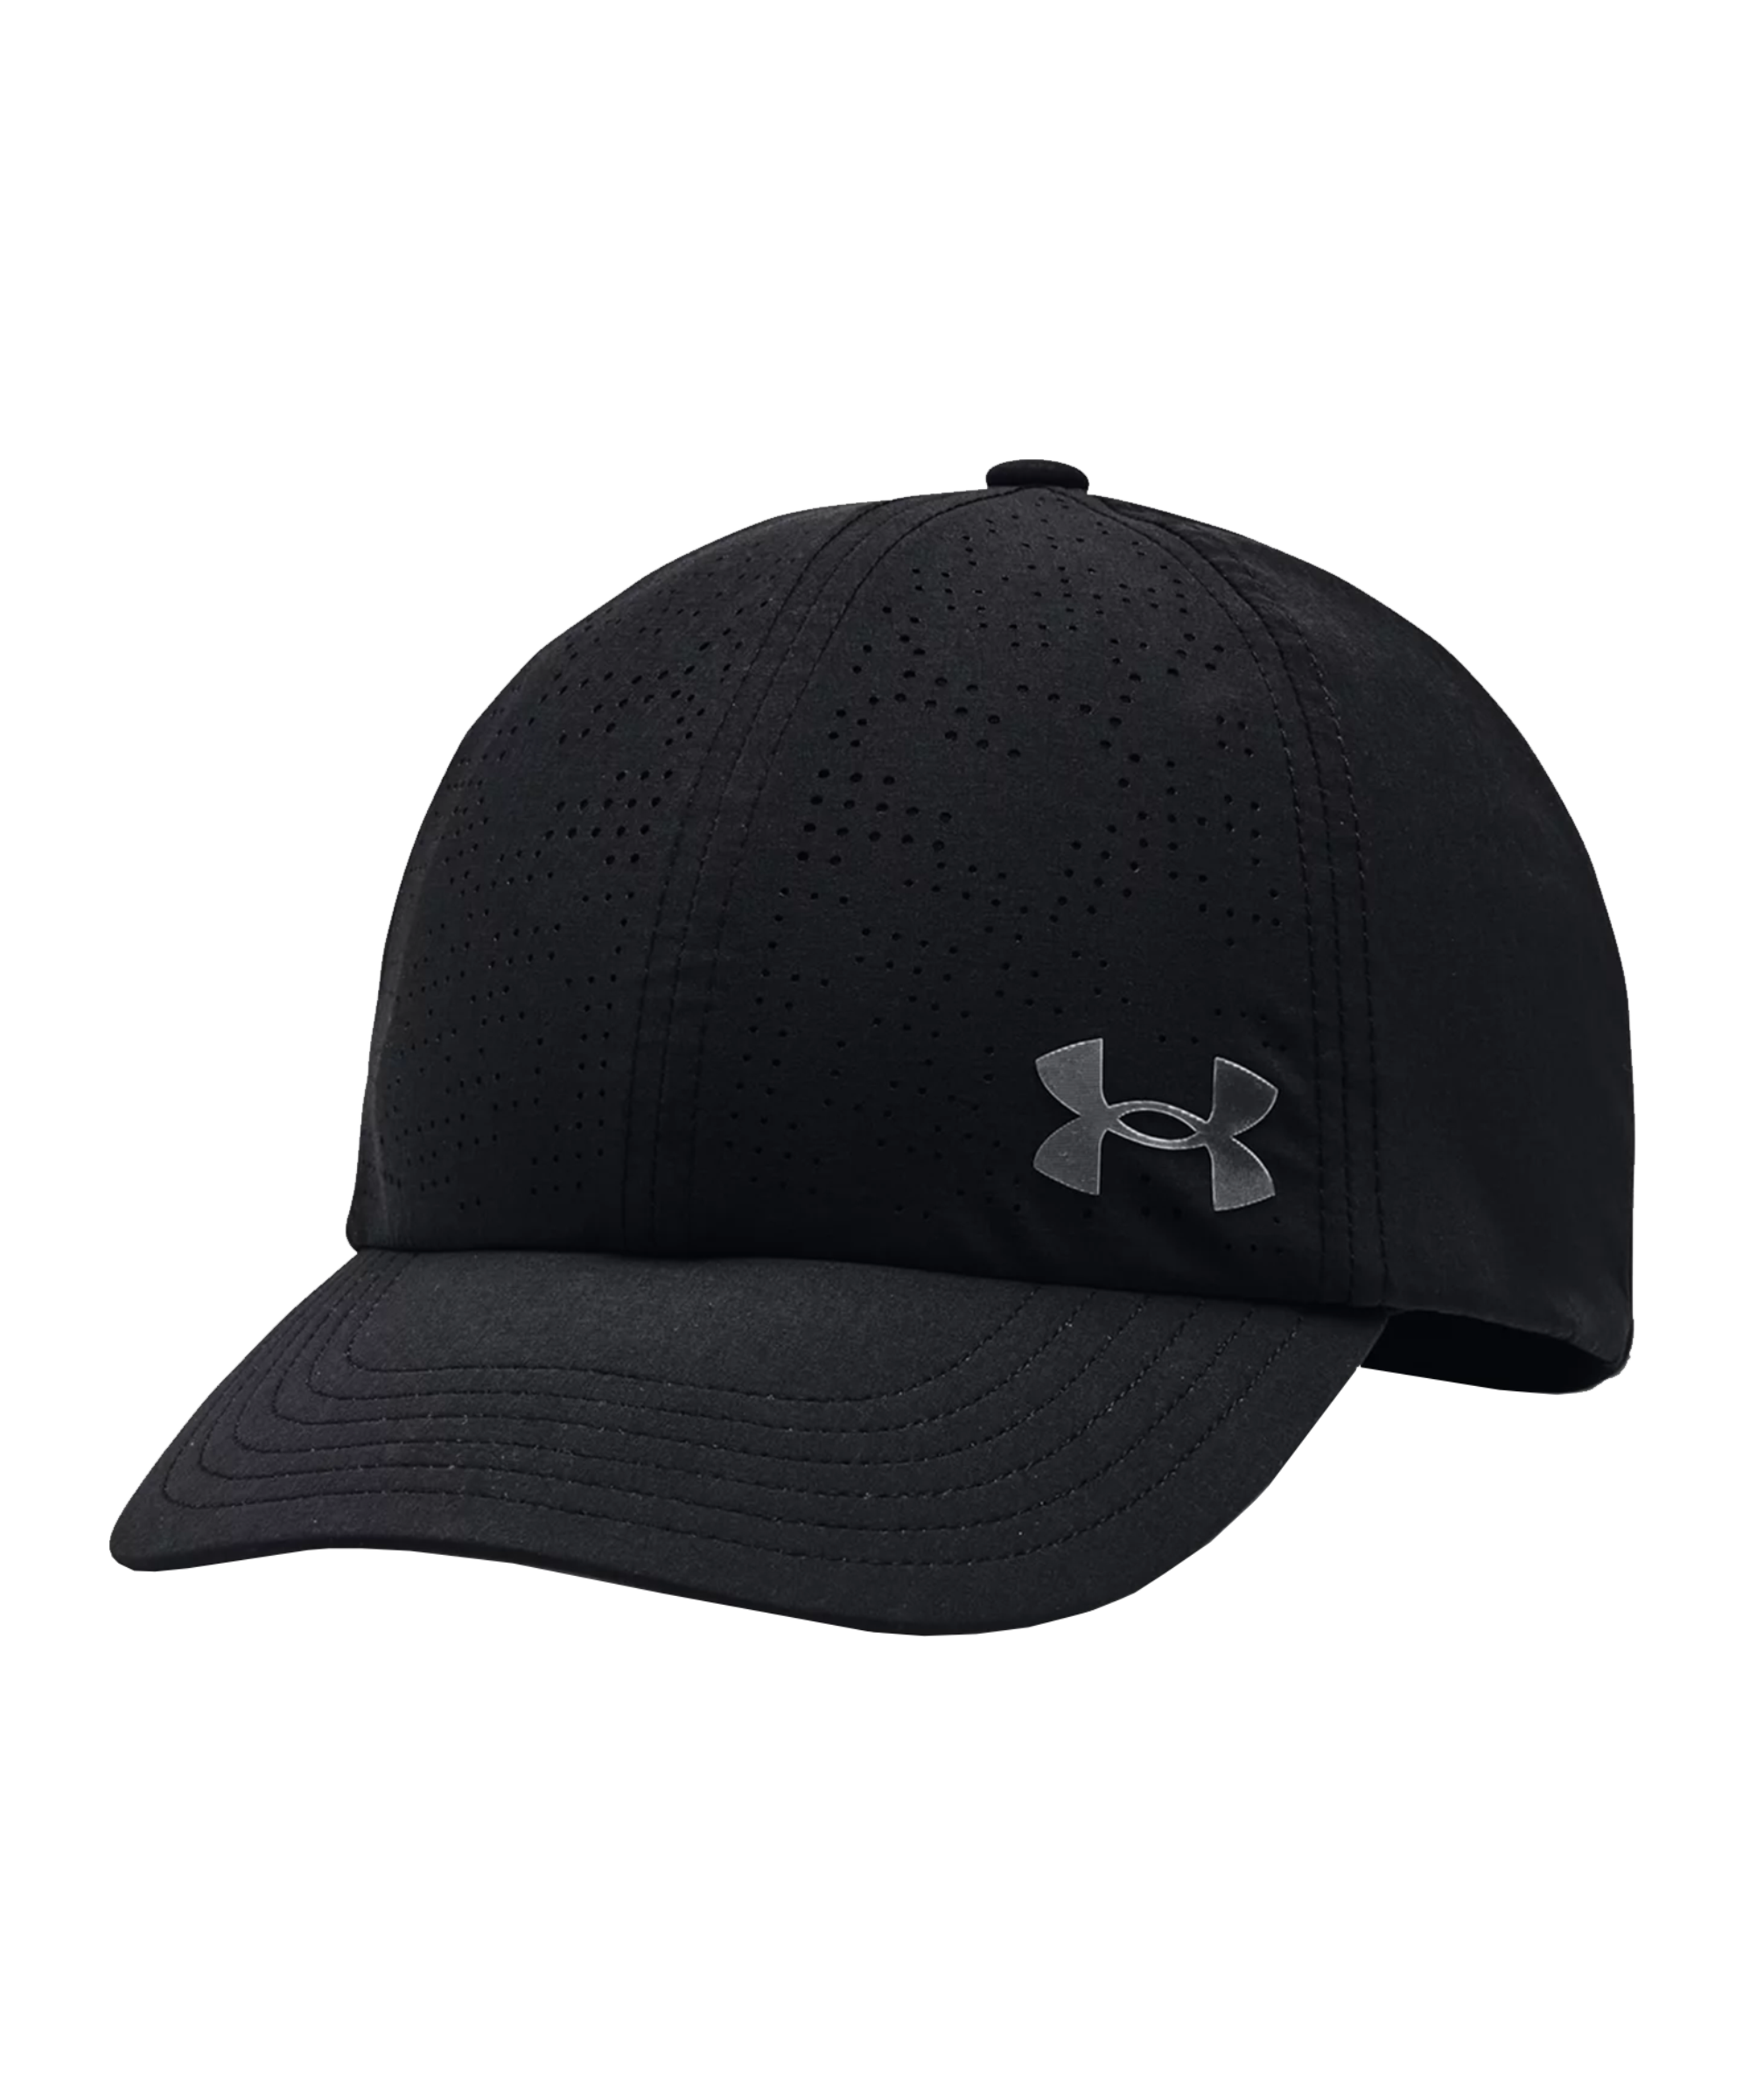 Under armour Baseball Caps Green Hats for Men for sale